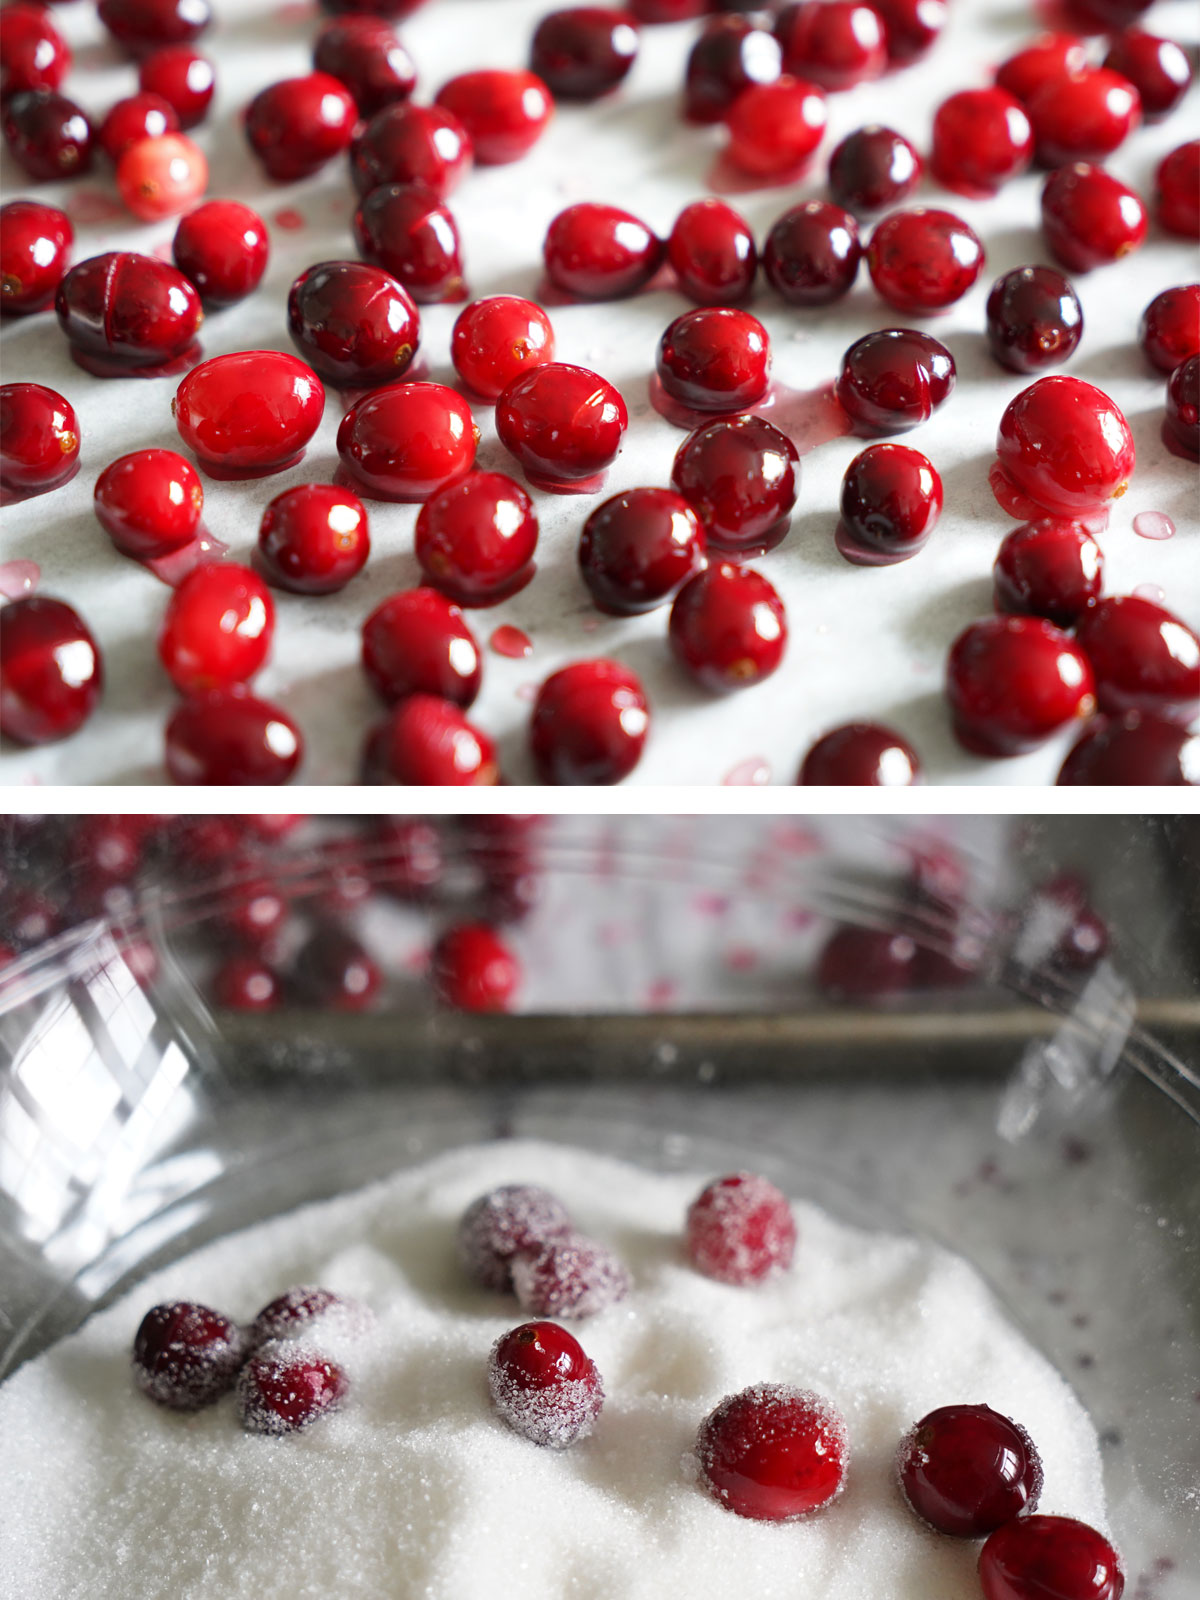 Cranberries coated in sugar syrup. Cranberries being dredged in sugar.